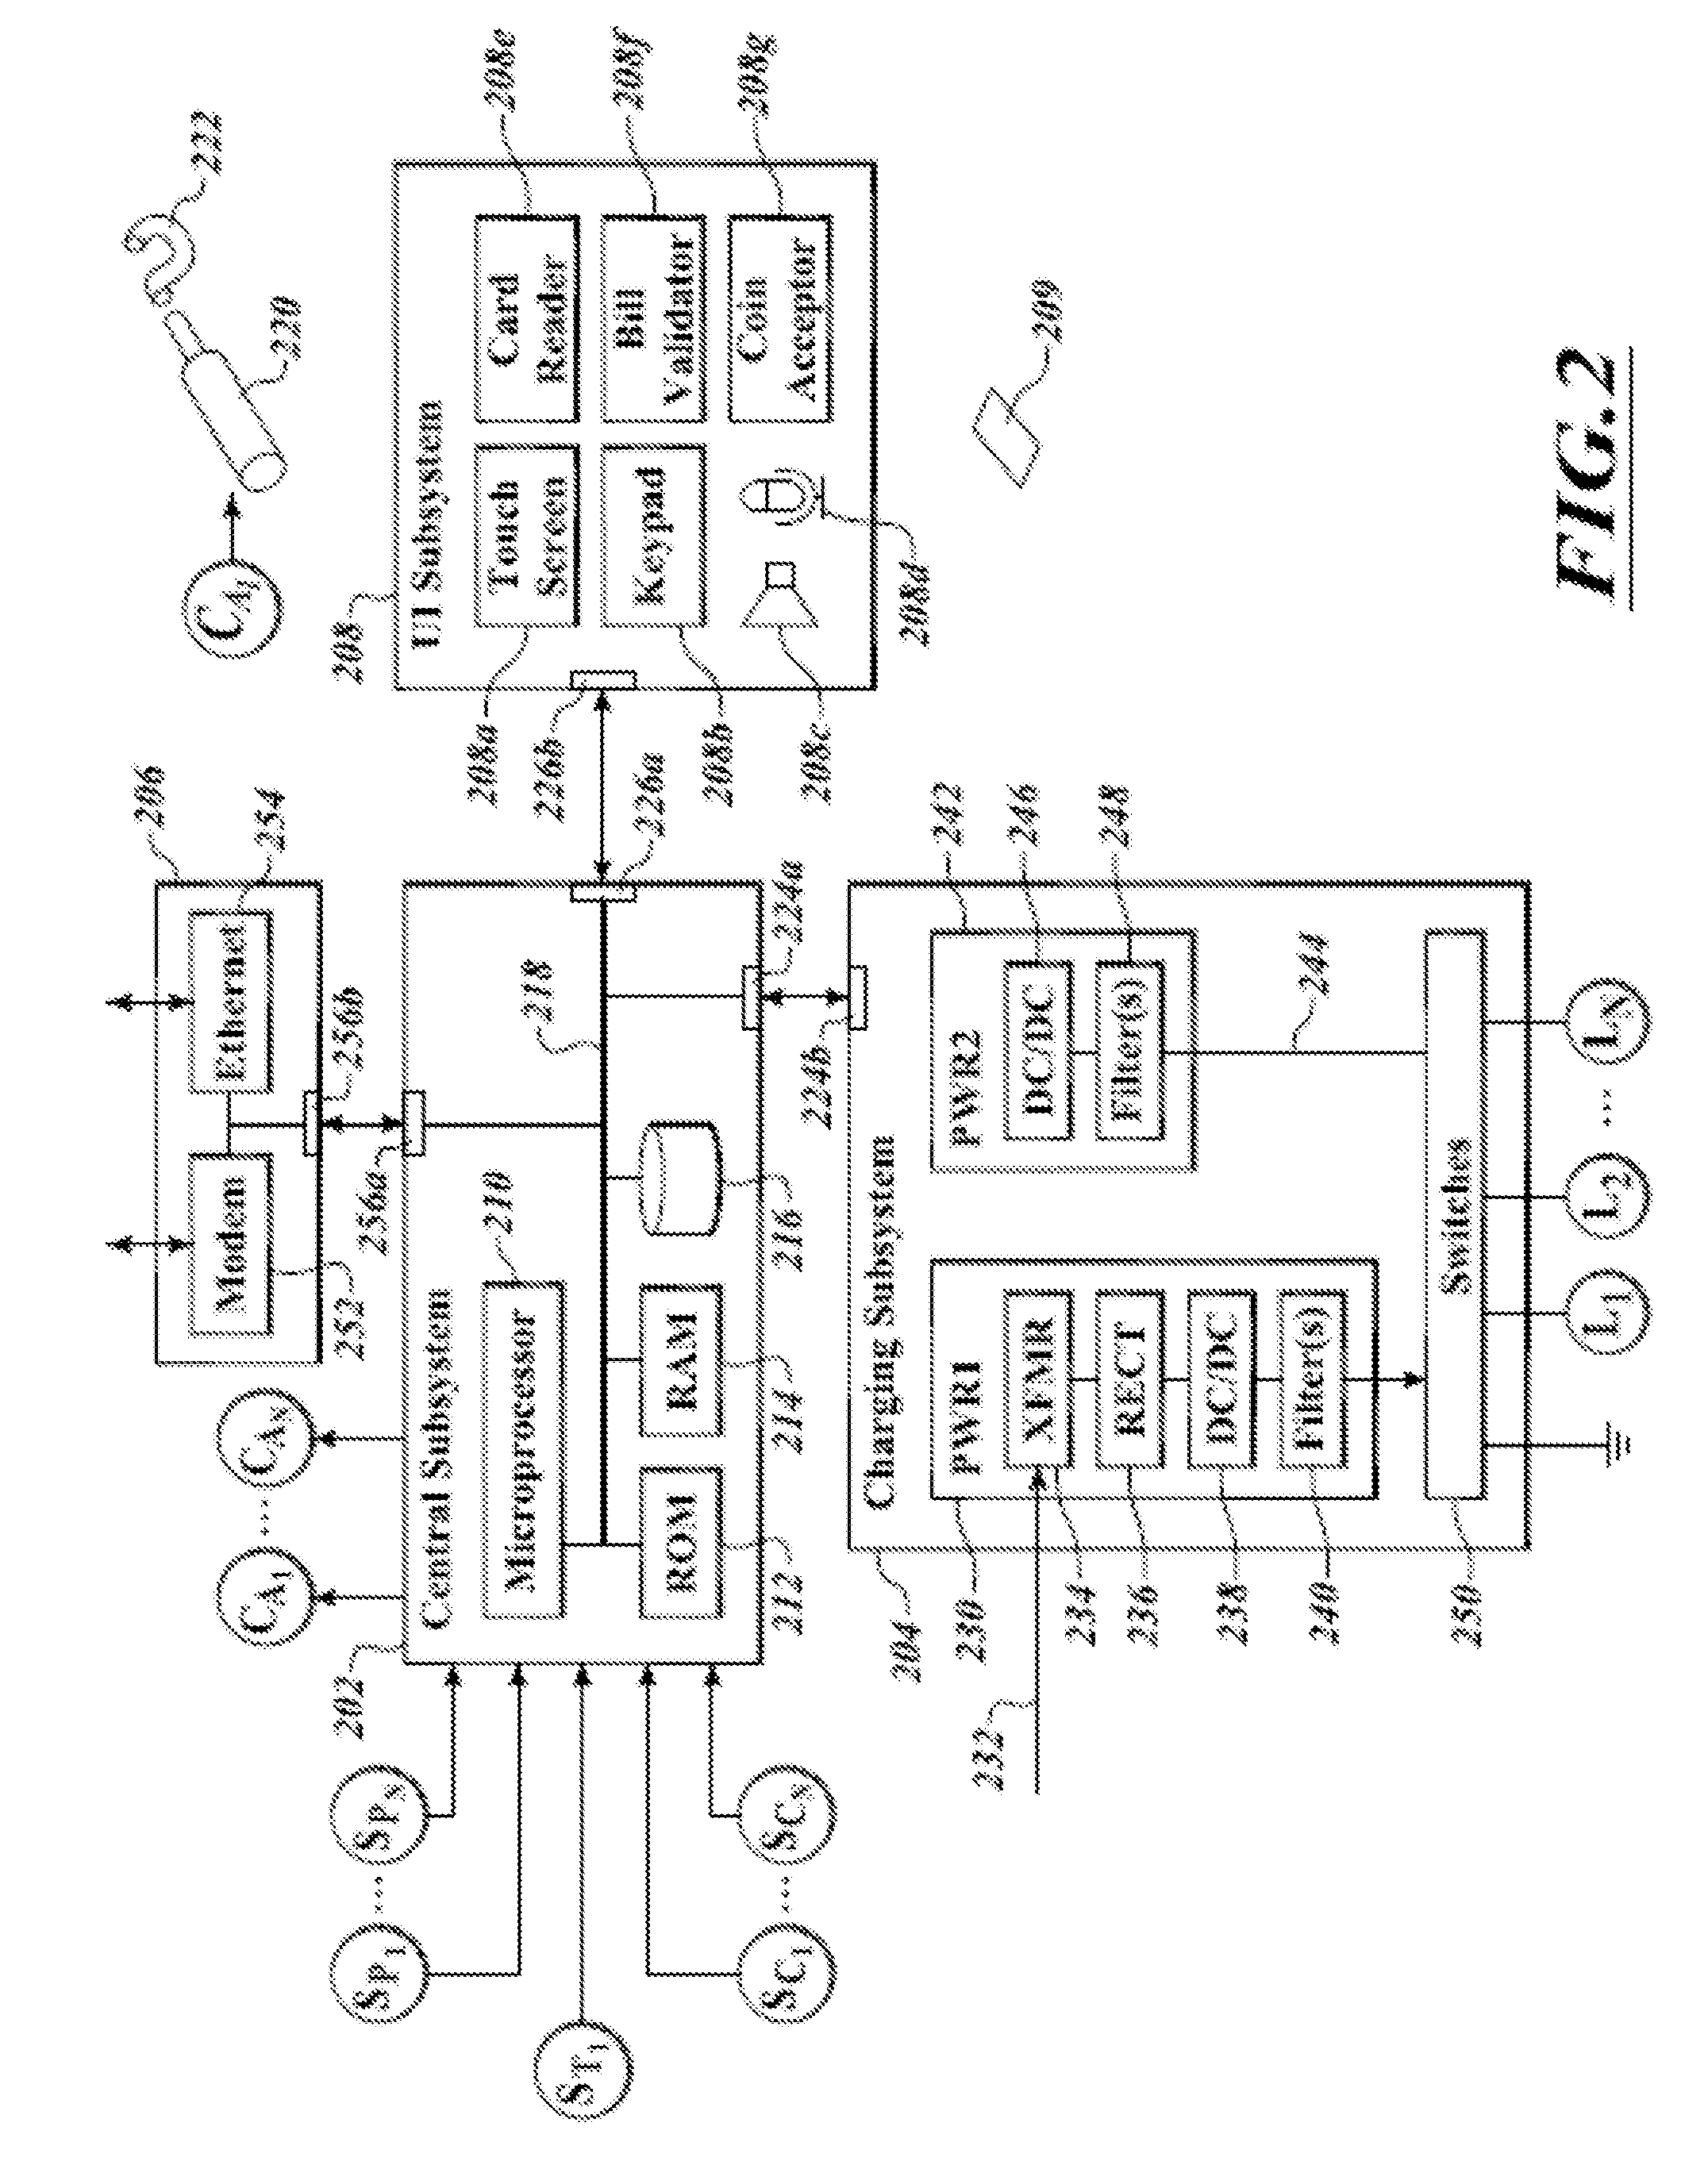 Apparatus, method and article for providing vehicle diagnostic data